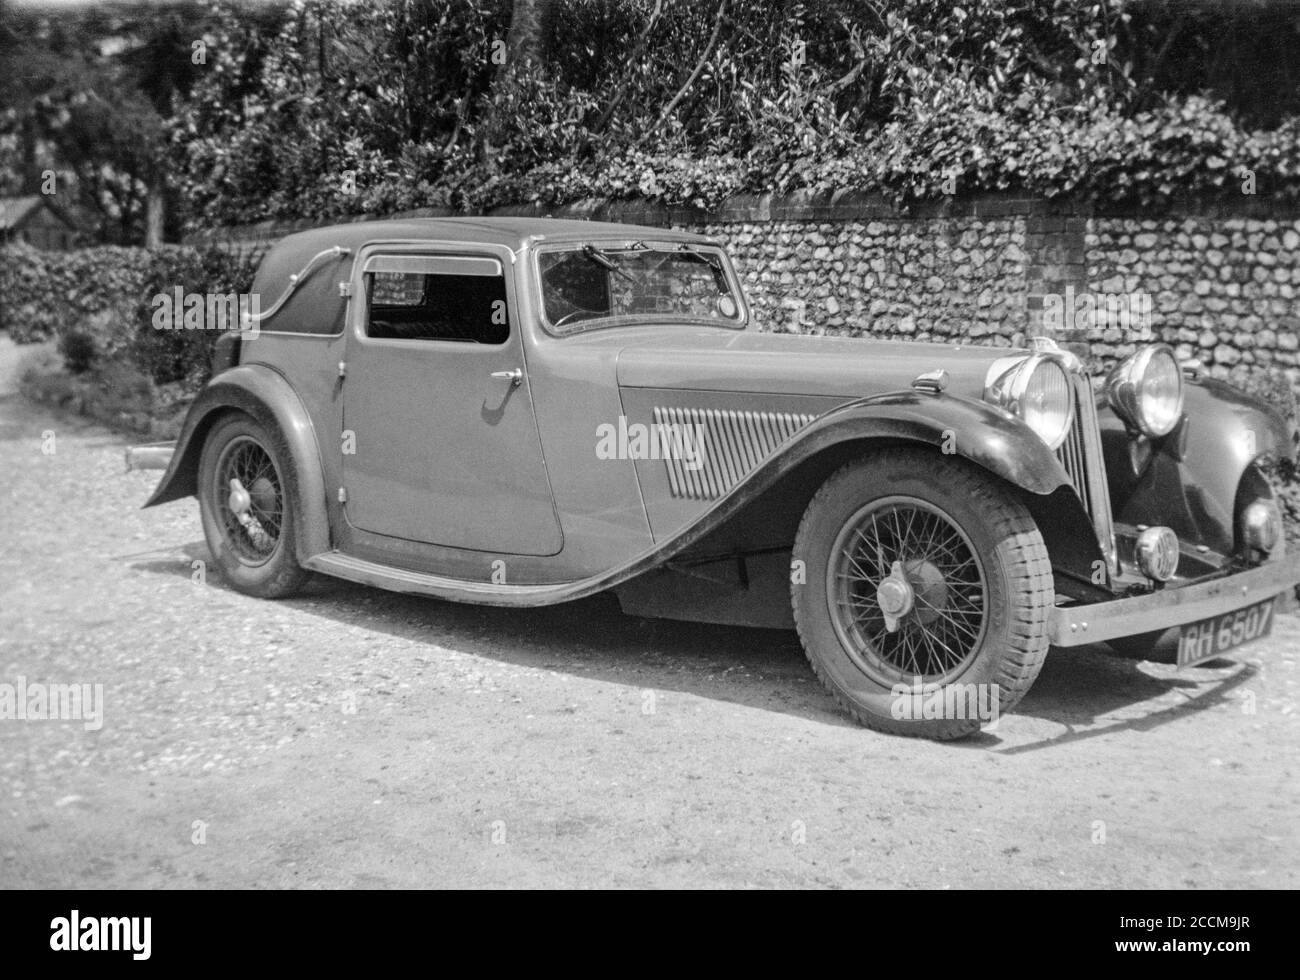 A vintage 1930s black and white photograph of a British Jaguar SS II Coupe Sports car. Registration number RH 6507. Stock Photo